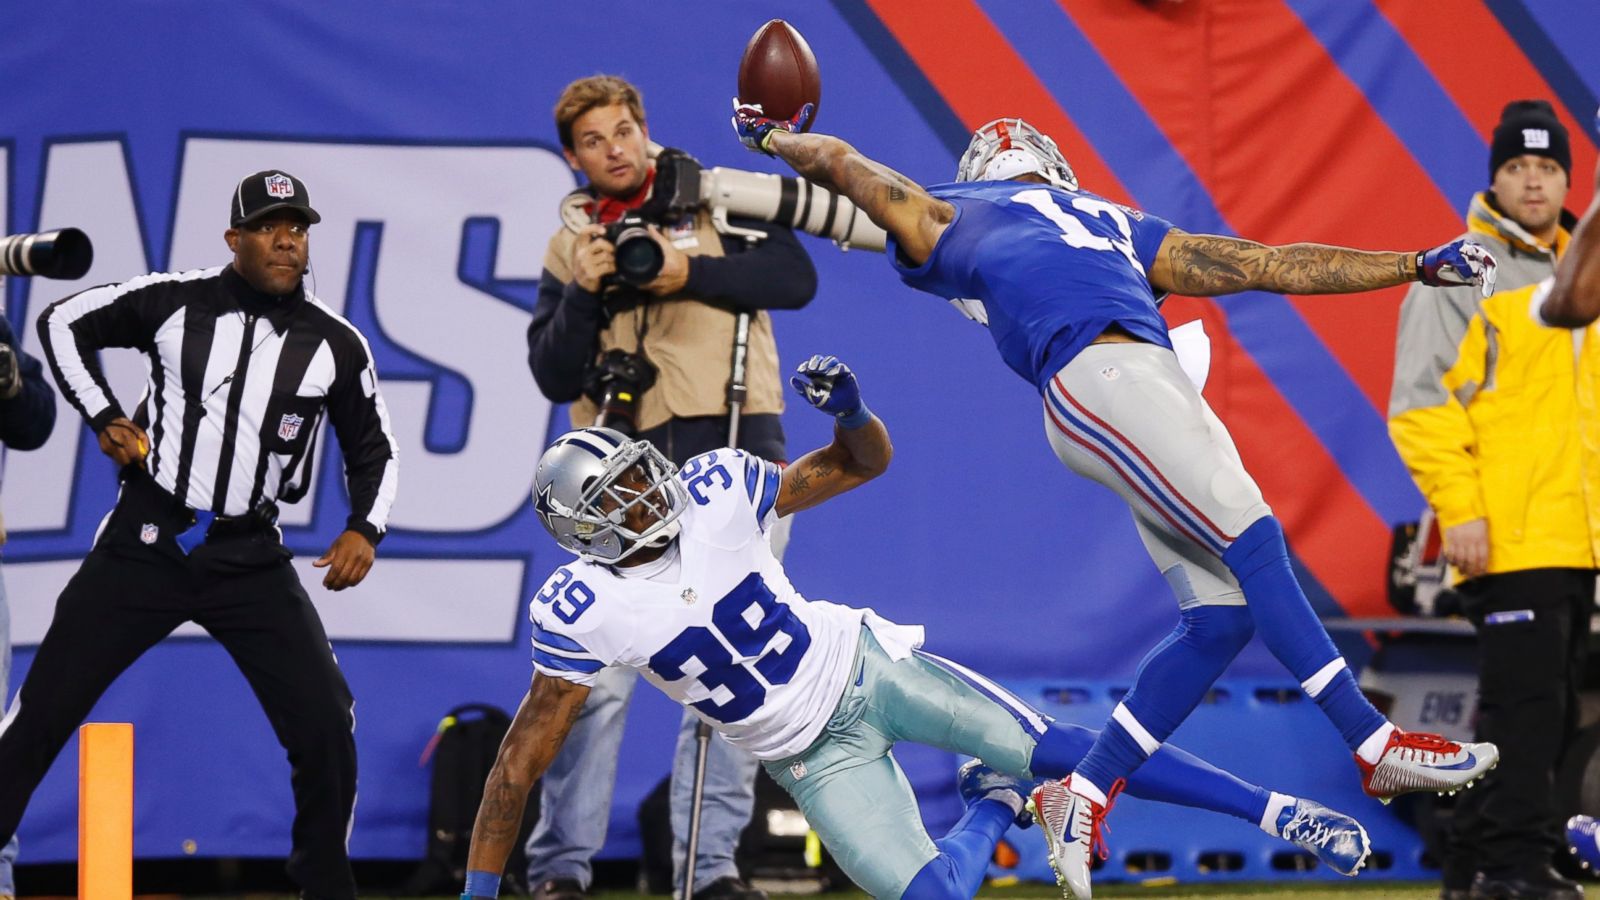 Odell Beckham Jr. Made One of the Greatest Football Catches Ever - ABC News